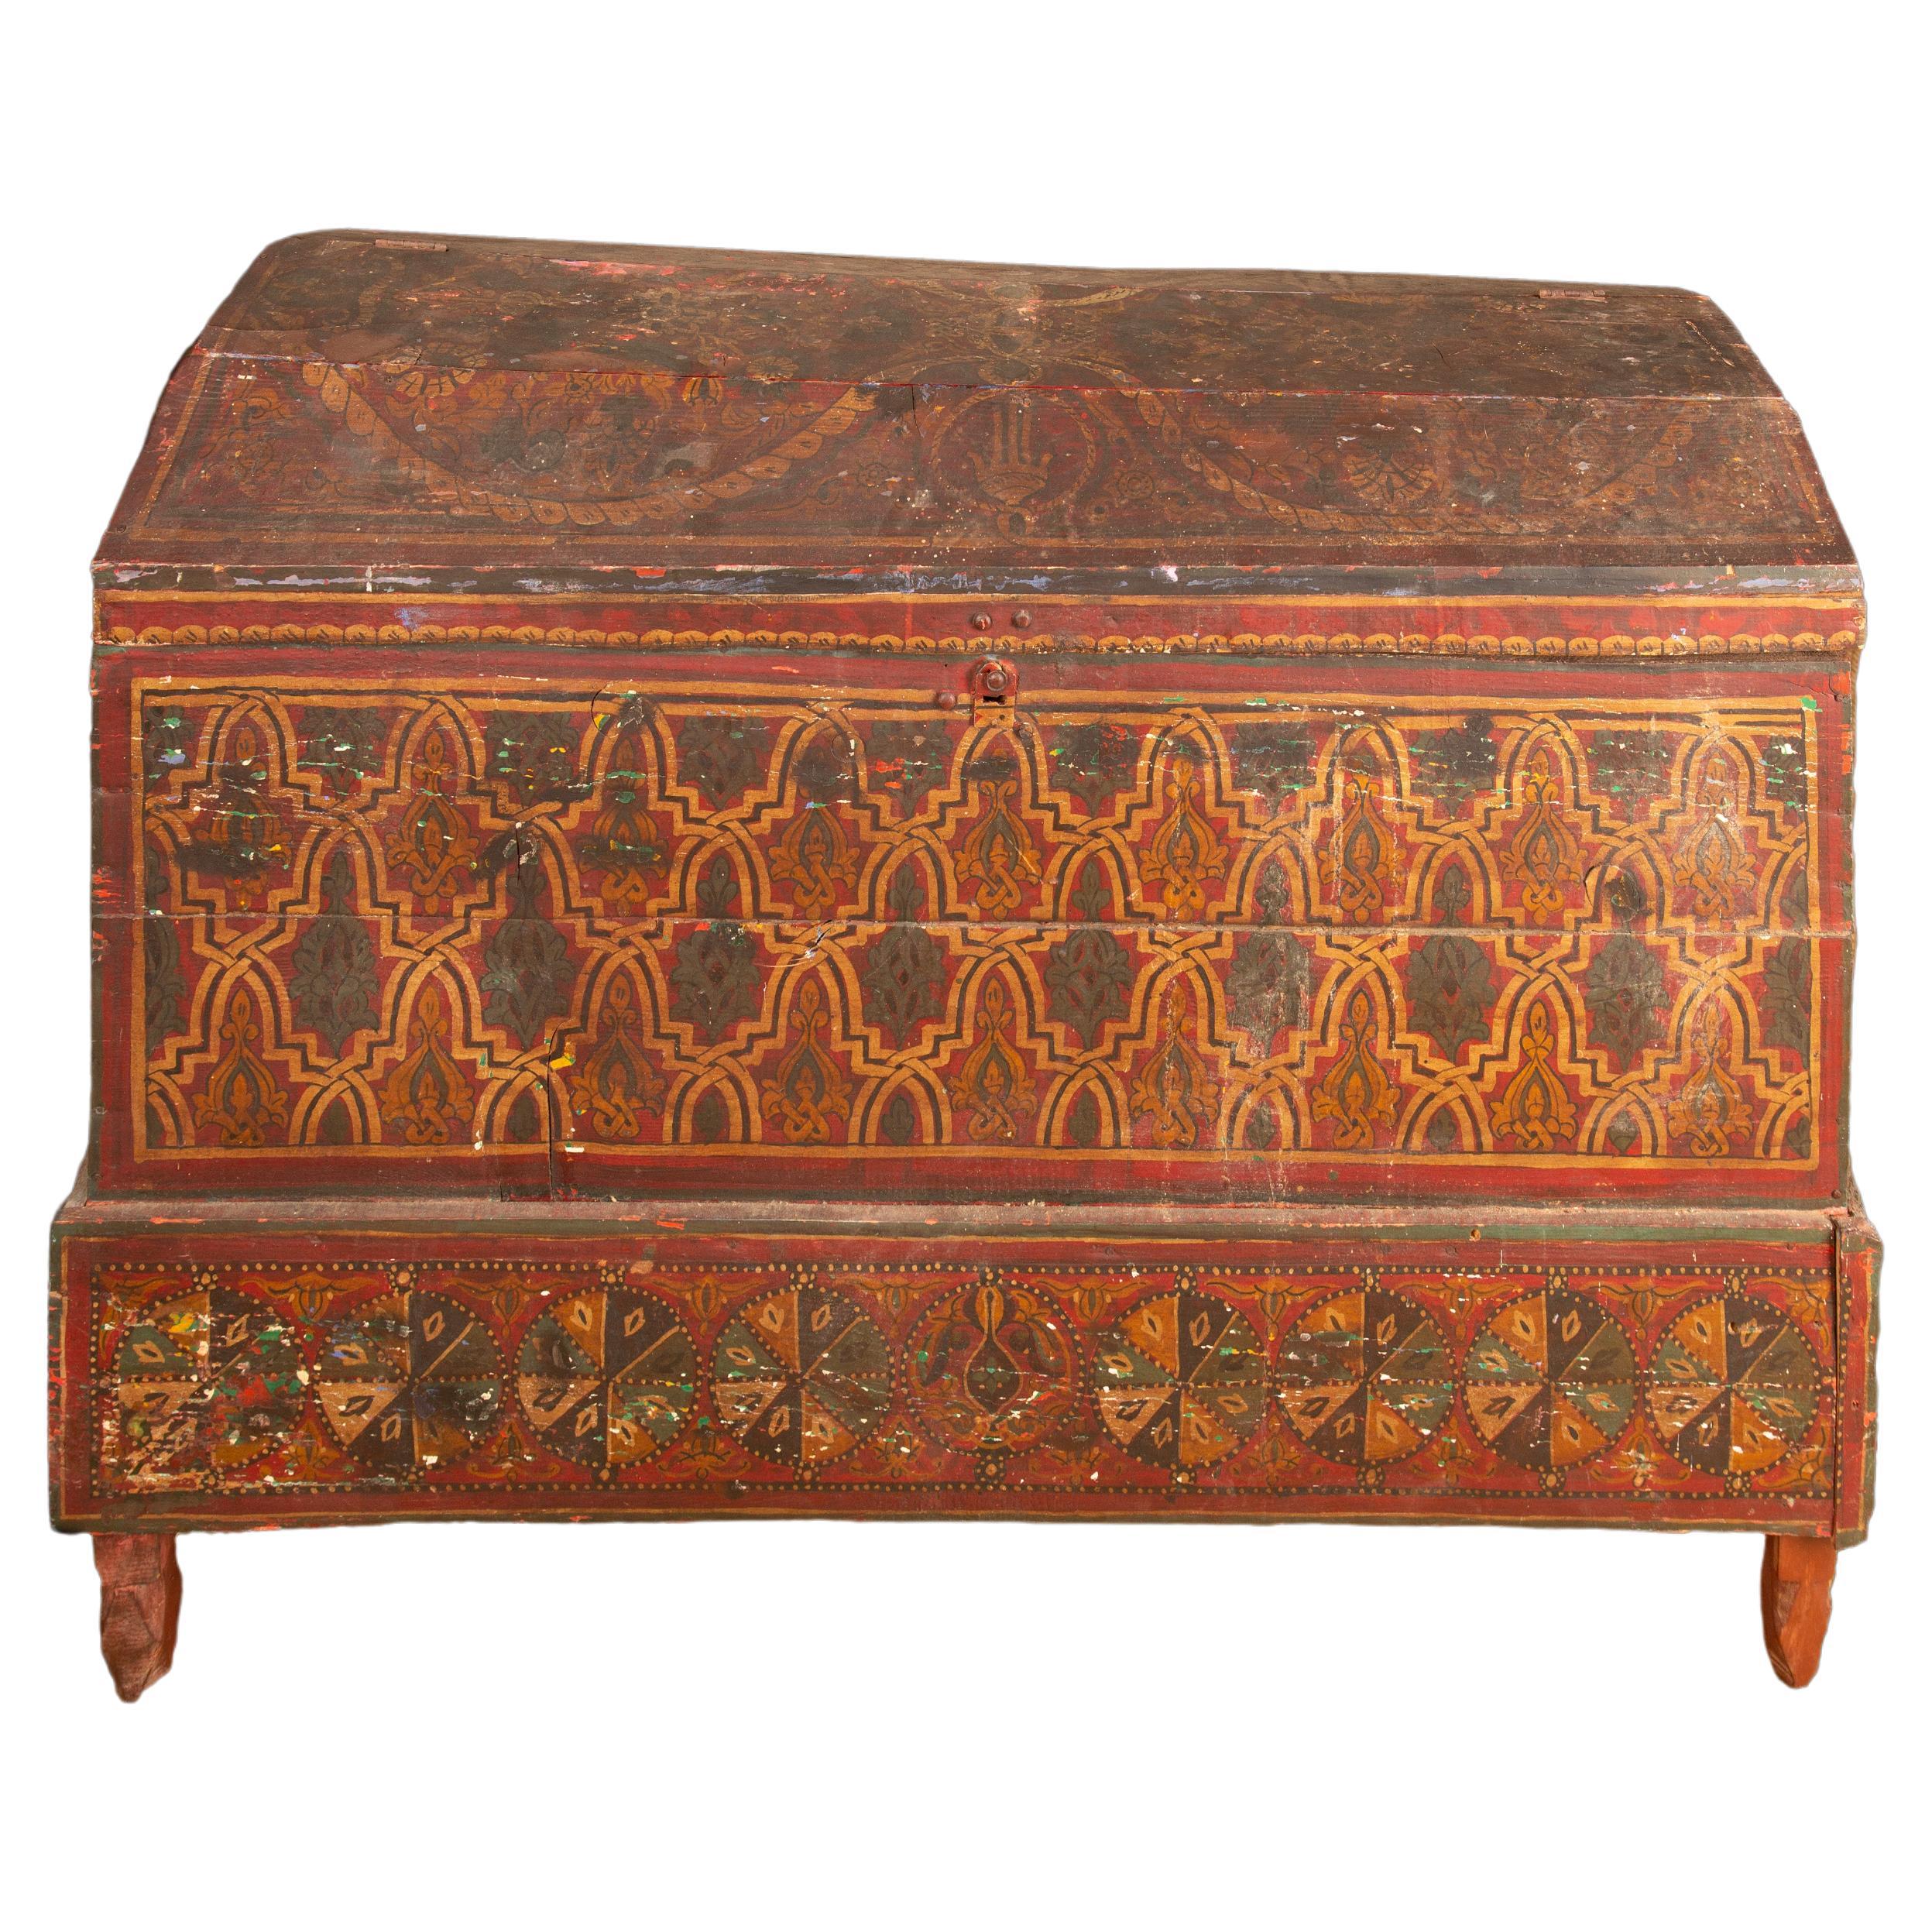 19th Century Antique Moroccan Hand Painted Wood Berber Chest